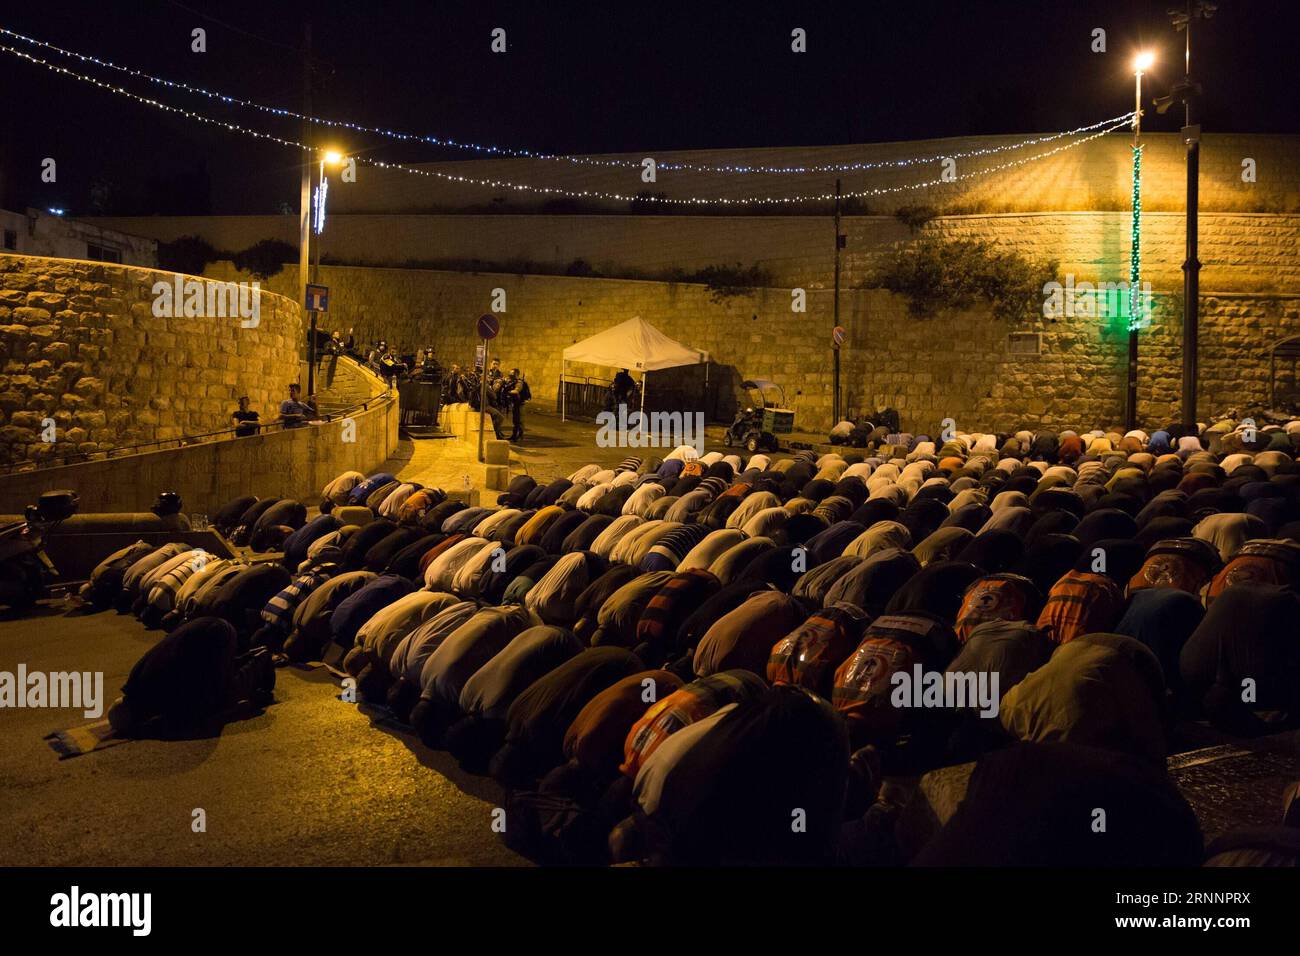 (170725) -- JERUSALEM, July 25, 2017 -- Muslims pray outside Lion s Gate of Jerusalem s Old City, July 25, 2017. Israel s Security Cabinet has decided to remove metal detectors from the entrance to the holy site in Jerusalem which is known as the Noble Sanctuary to Muslims and Temple Mount to Jews, and to take security measures based on advanced technologies ( smart checks ) instead, according to a statement issued by the Prime Minister s Office on Tuesday morning. ) (zjy) MIDEAST-JERUSALEM-AL-AQSA MOSQUE COMPOUND-METAL DETECTOR-REMOVAL GuoxYu PUBLICATIONxNOTxINxCHN   Jerusalem July 25 2017 Mu Stock Photo